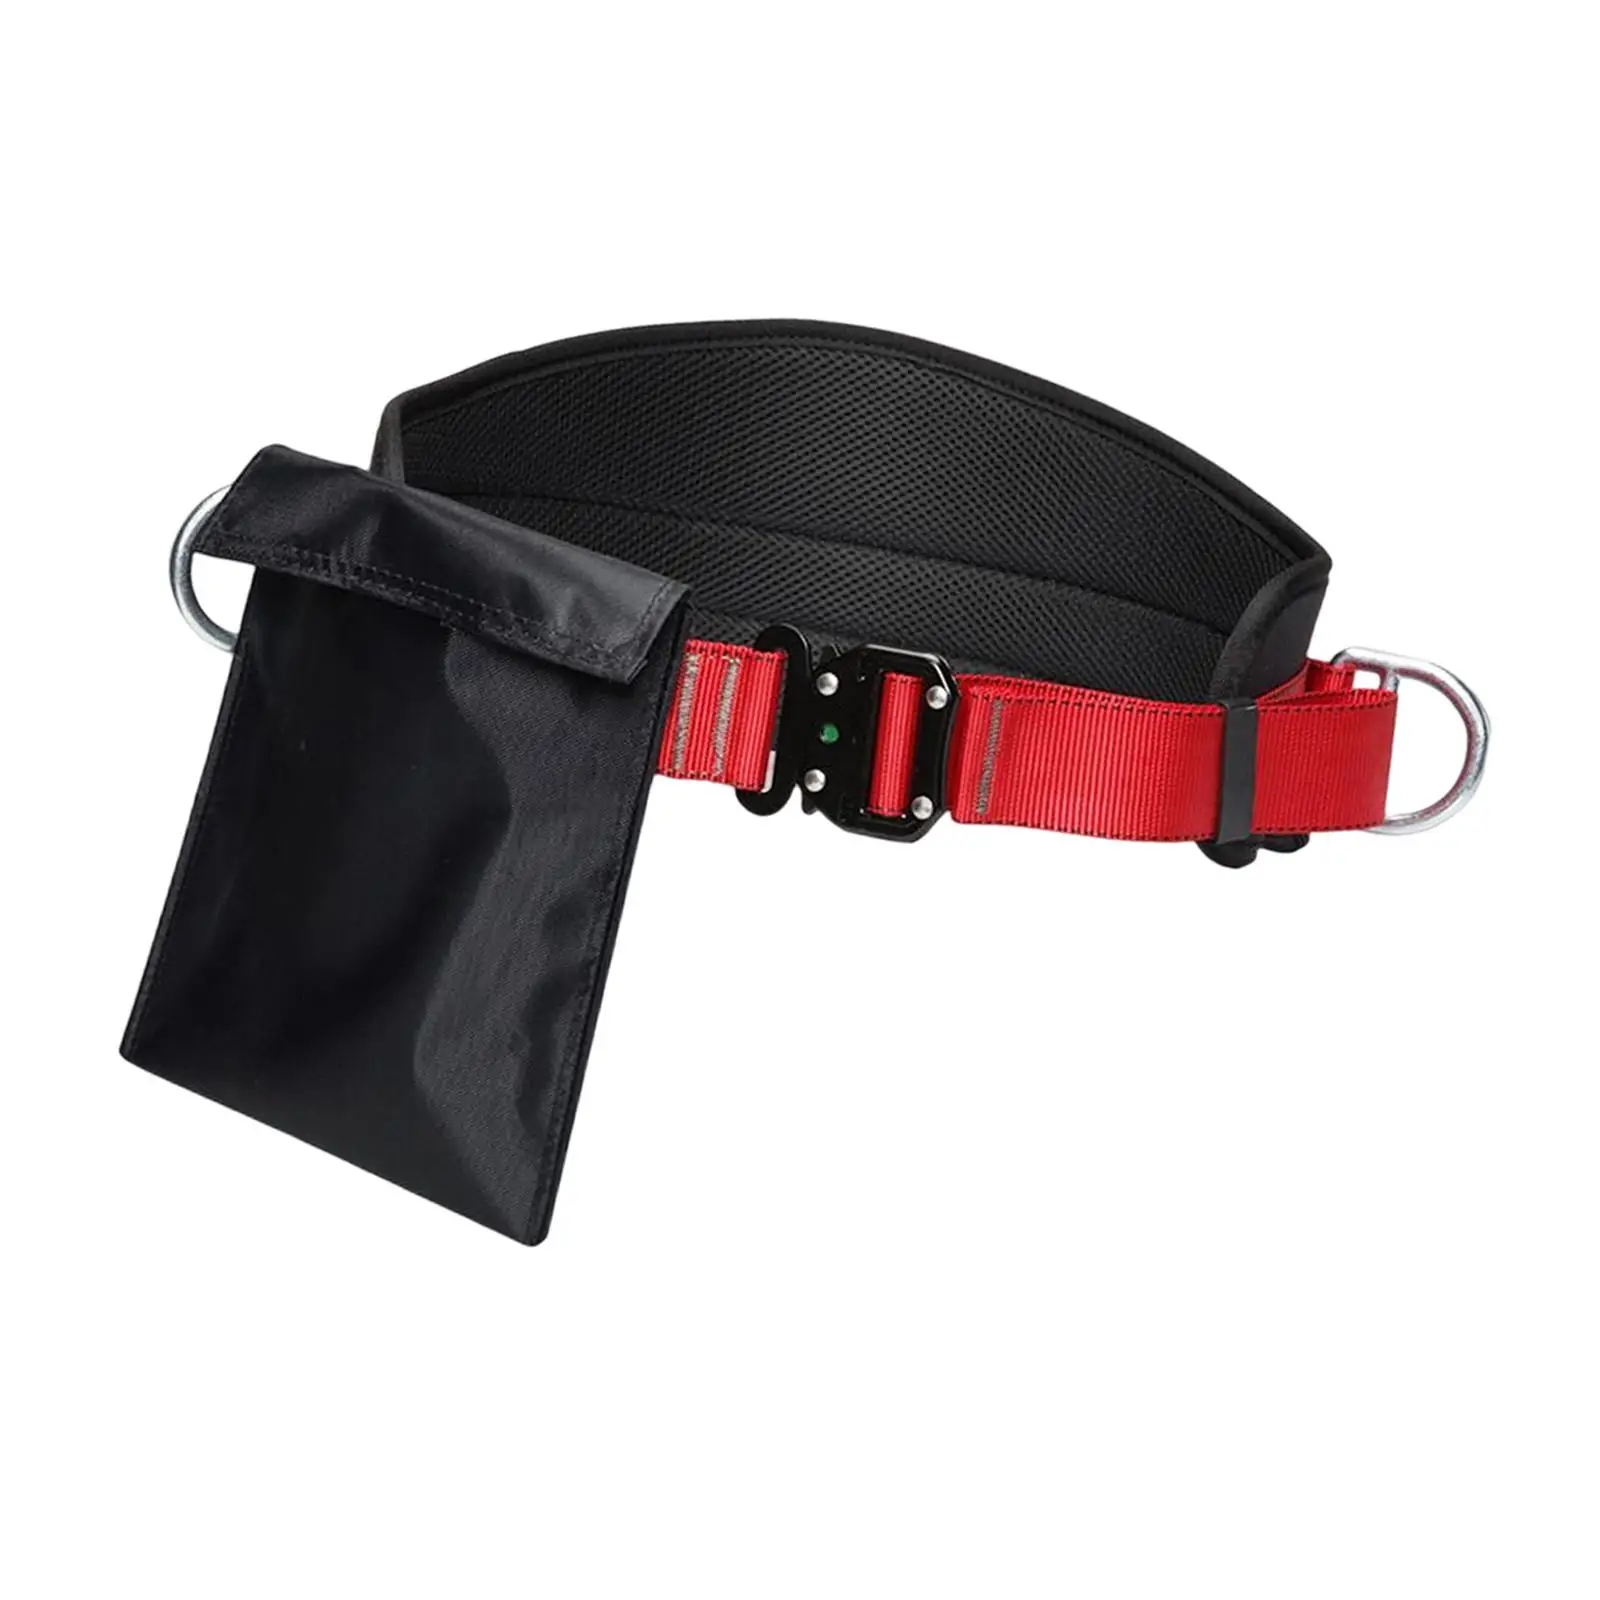 Climbing Safety Harness Protective Equipment with D Rings Waist Belt for Outdoor